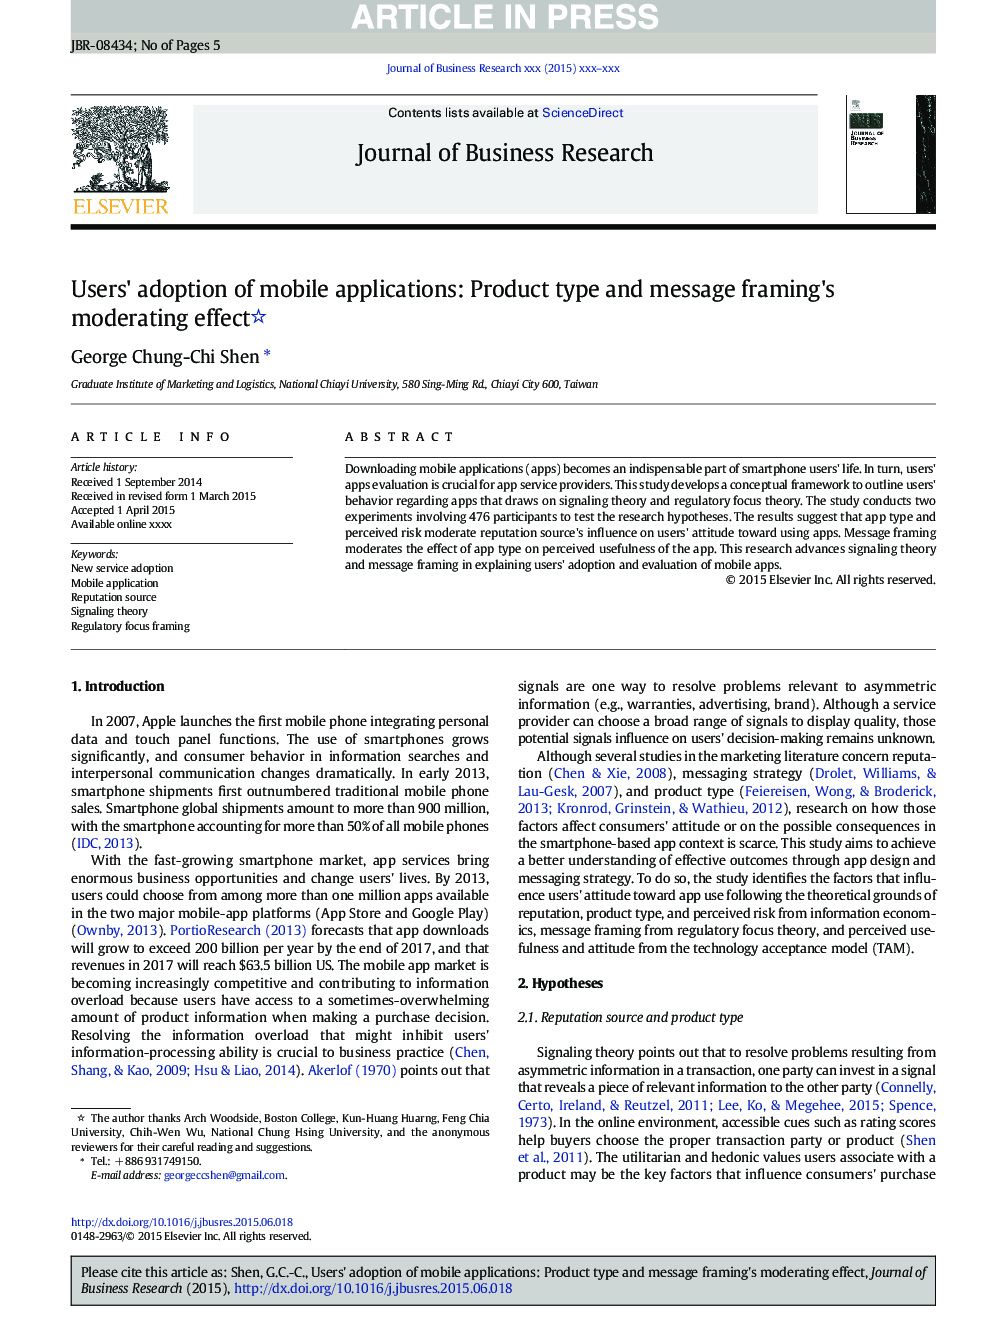 Users' adoption of mobile applications: Product type and message framing's moderating effect